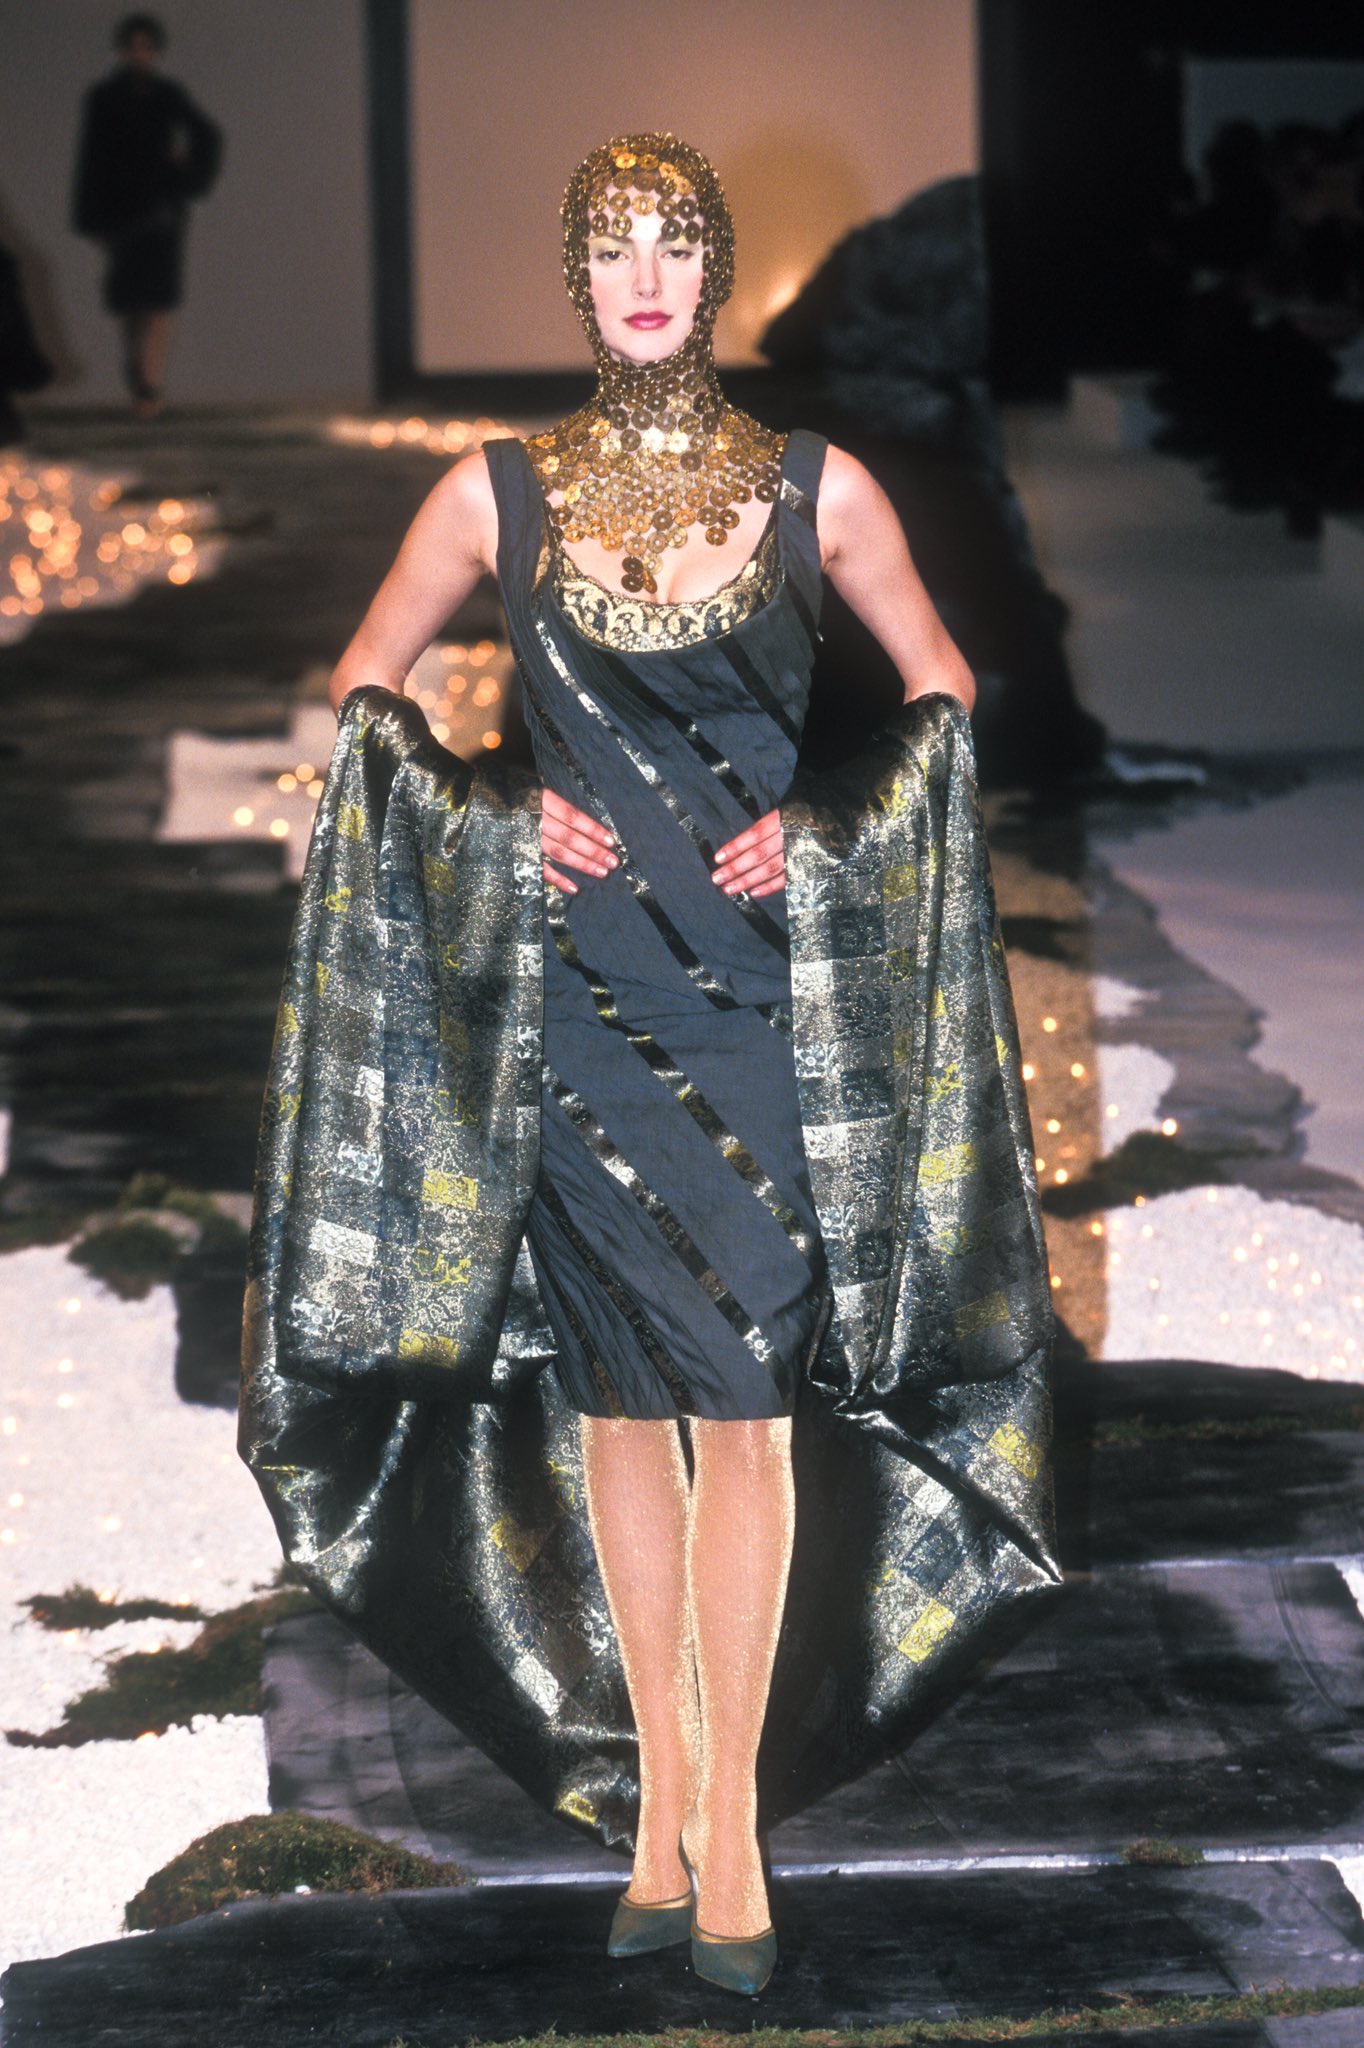 Nathan on X: givenchy haute couture by alexander mcqueen 'search for the  golden fleece' s/s 1997  / X